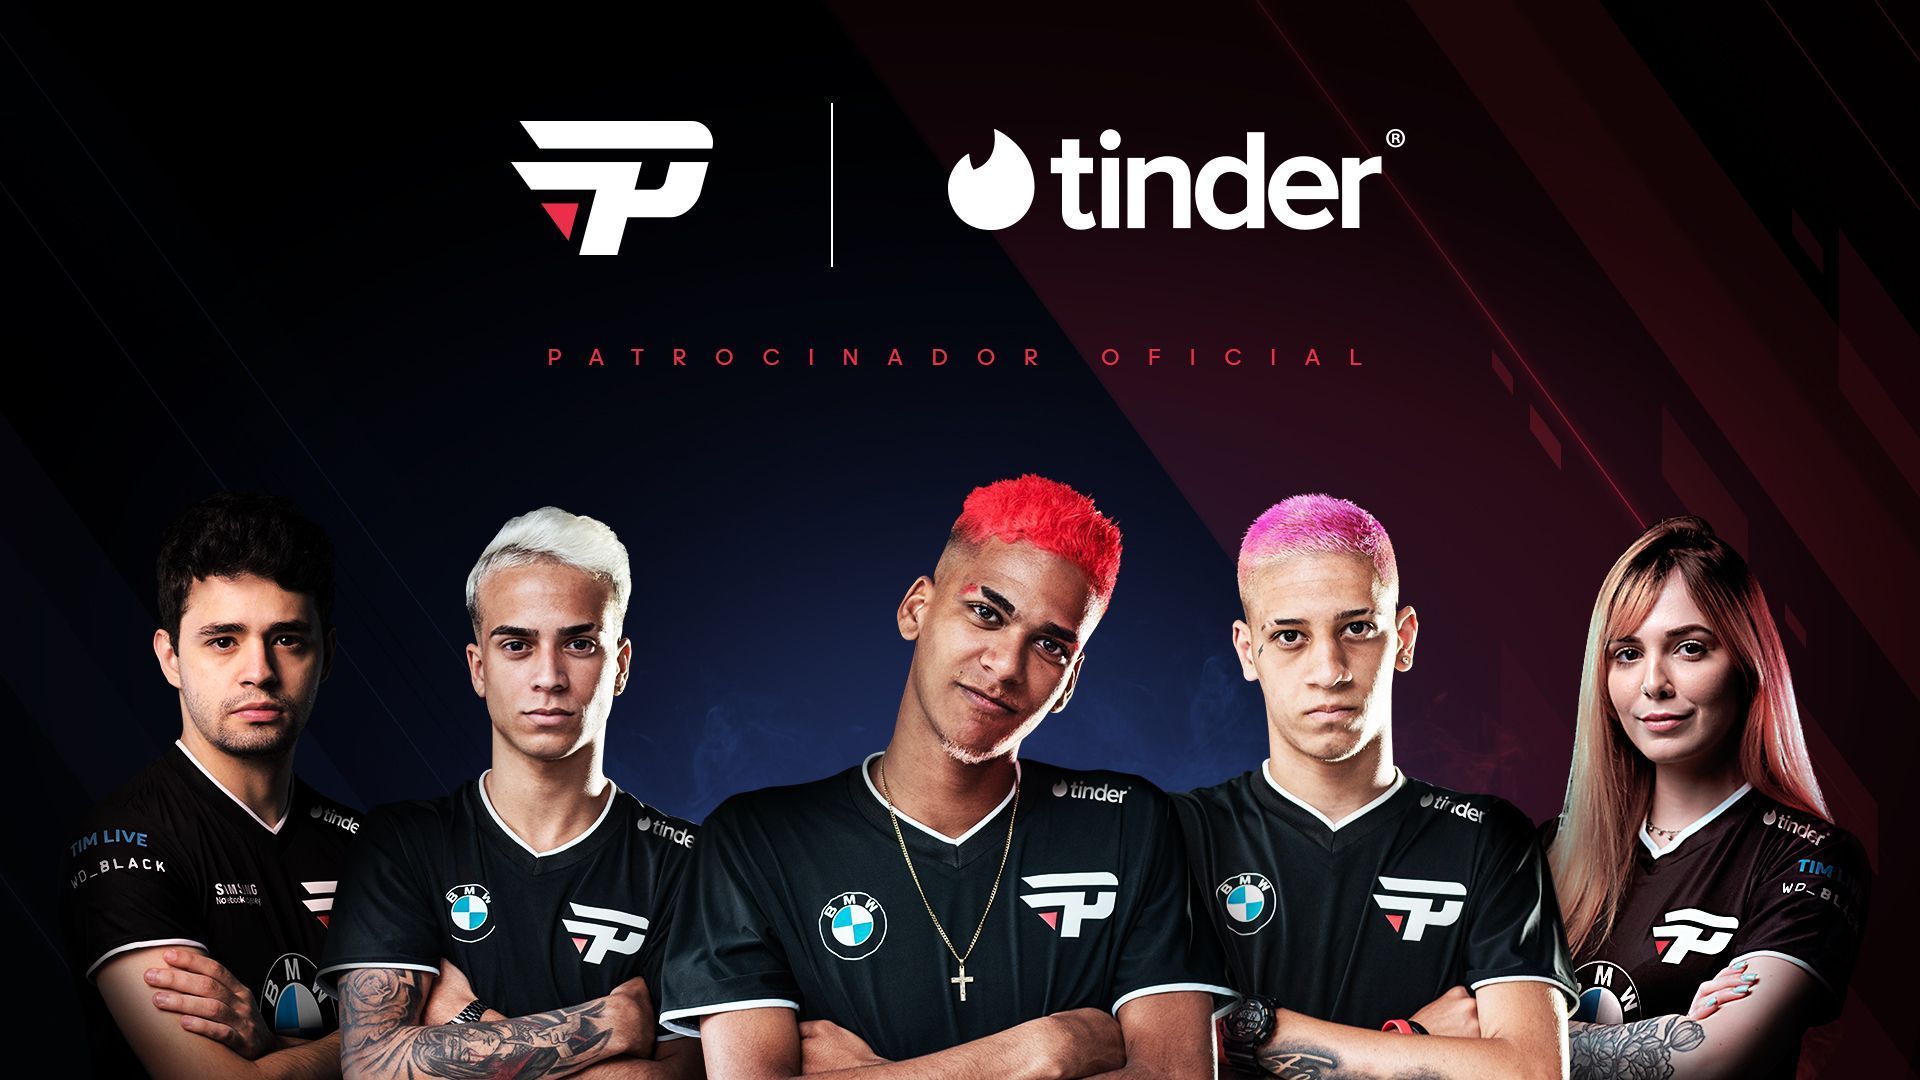 Tinder flirts with esports with new partnership with paIN Gaming ONE Esports